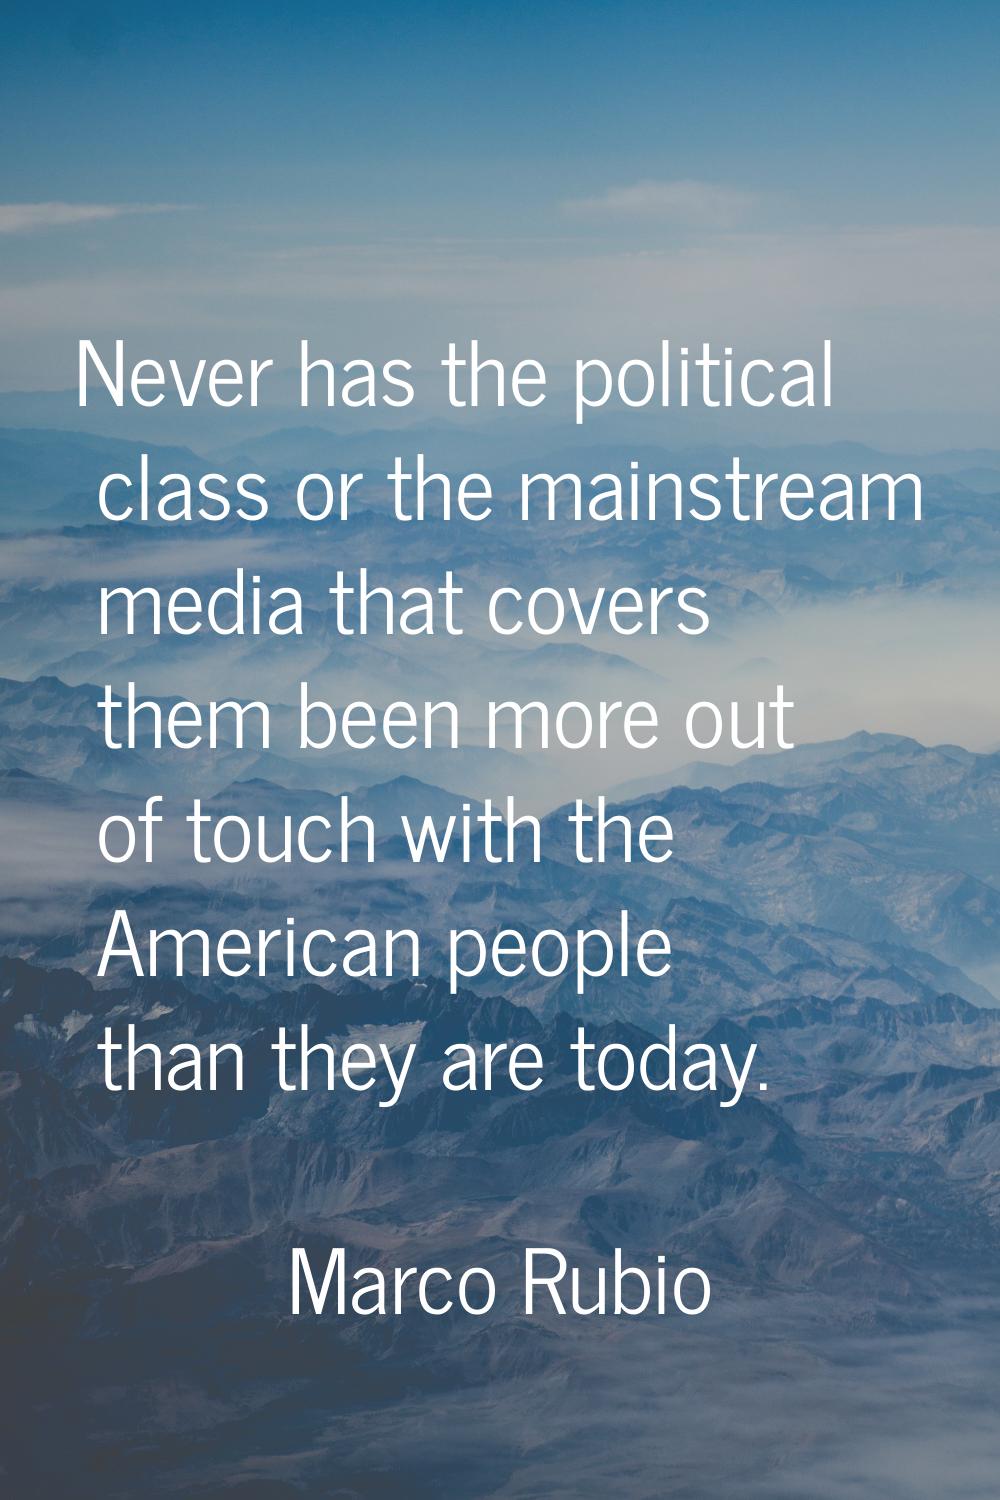 Never has the political class or the mainstream media that covers them been more out of touch with 